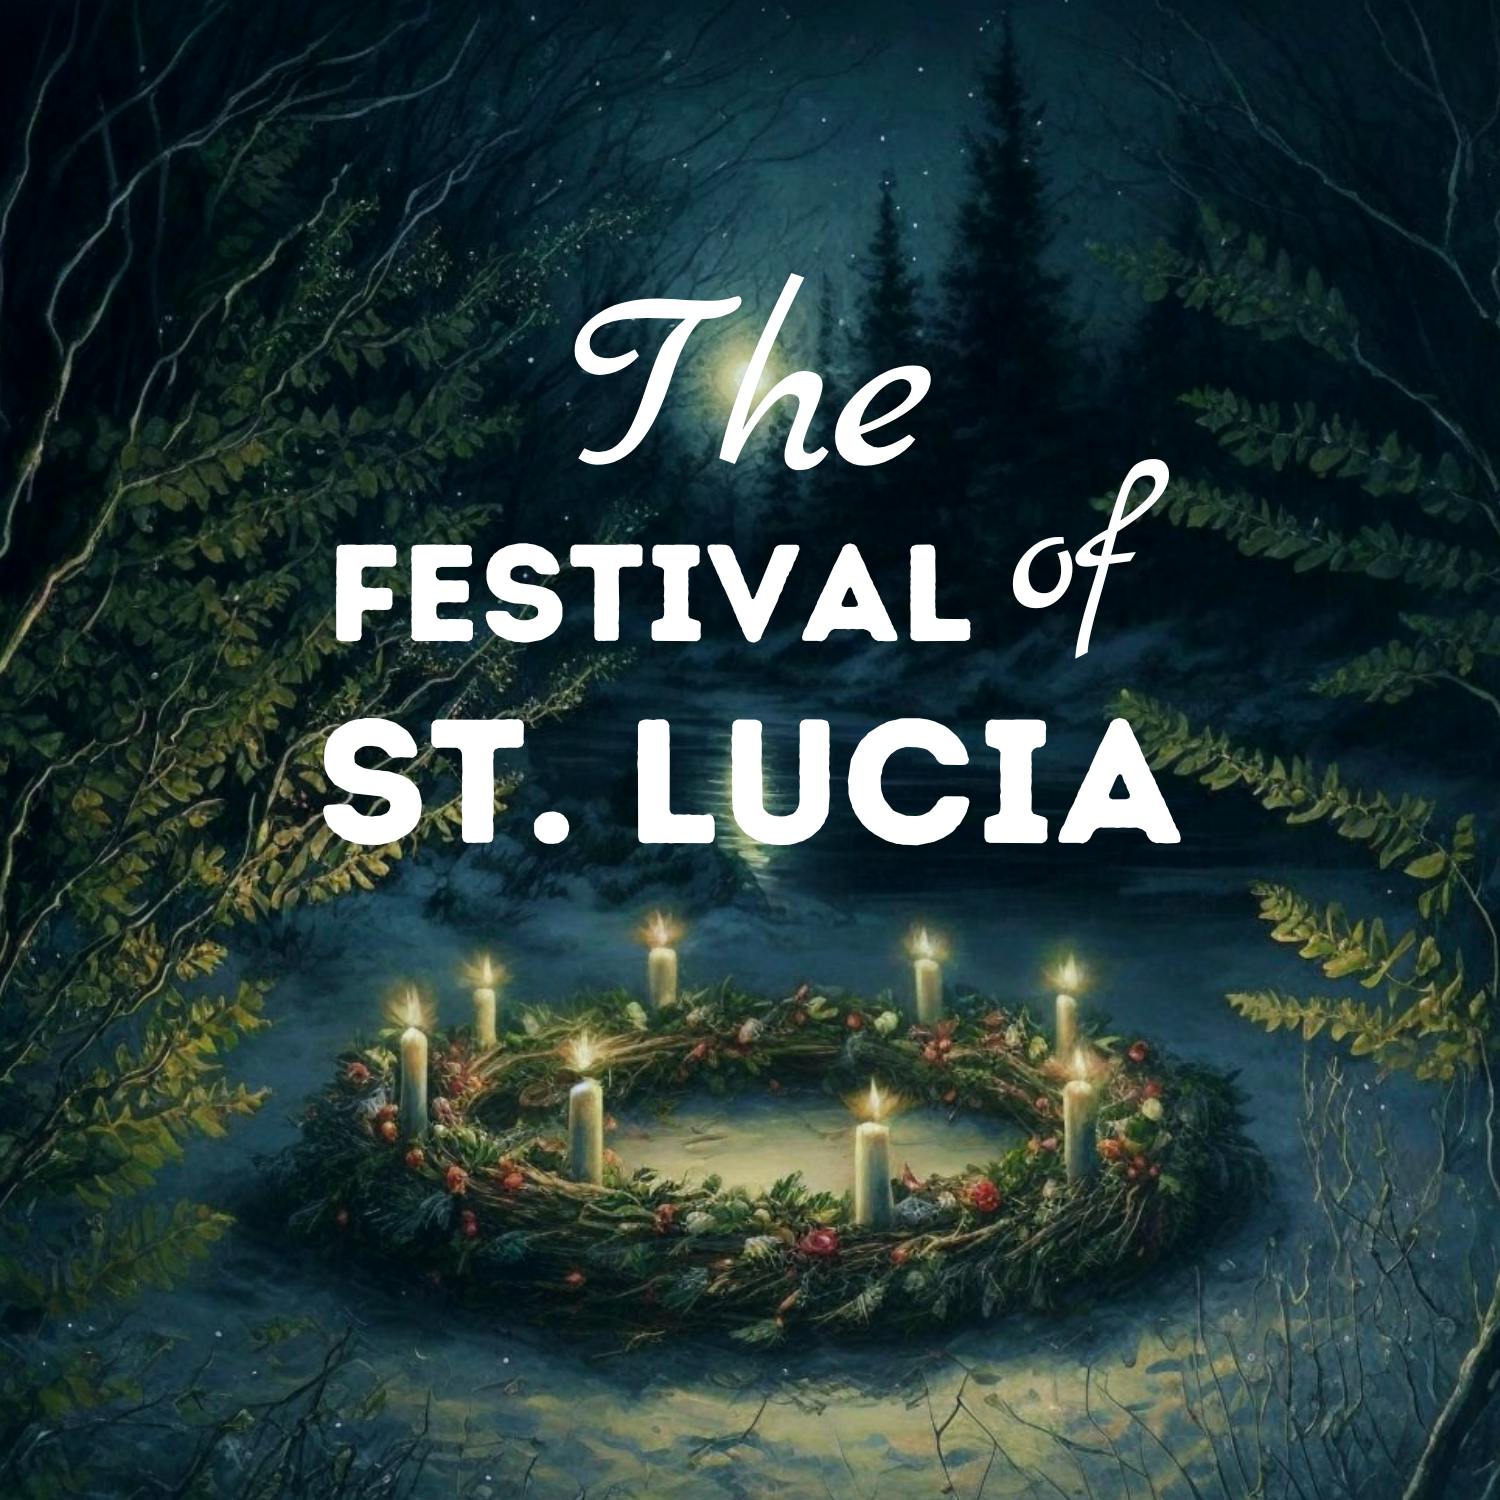 The Festival of St. Lucia